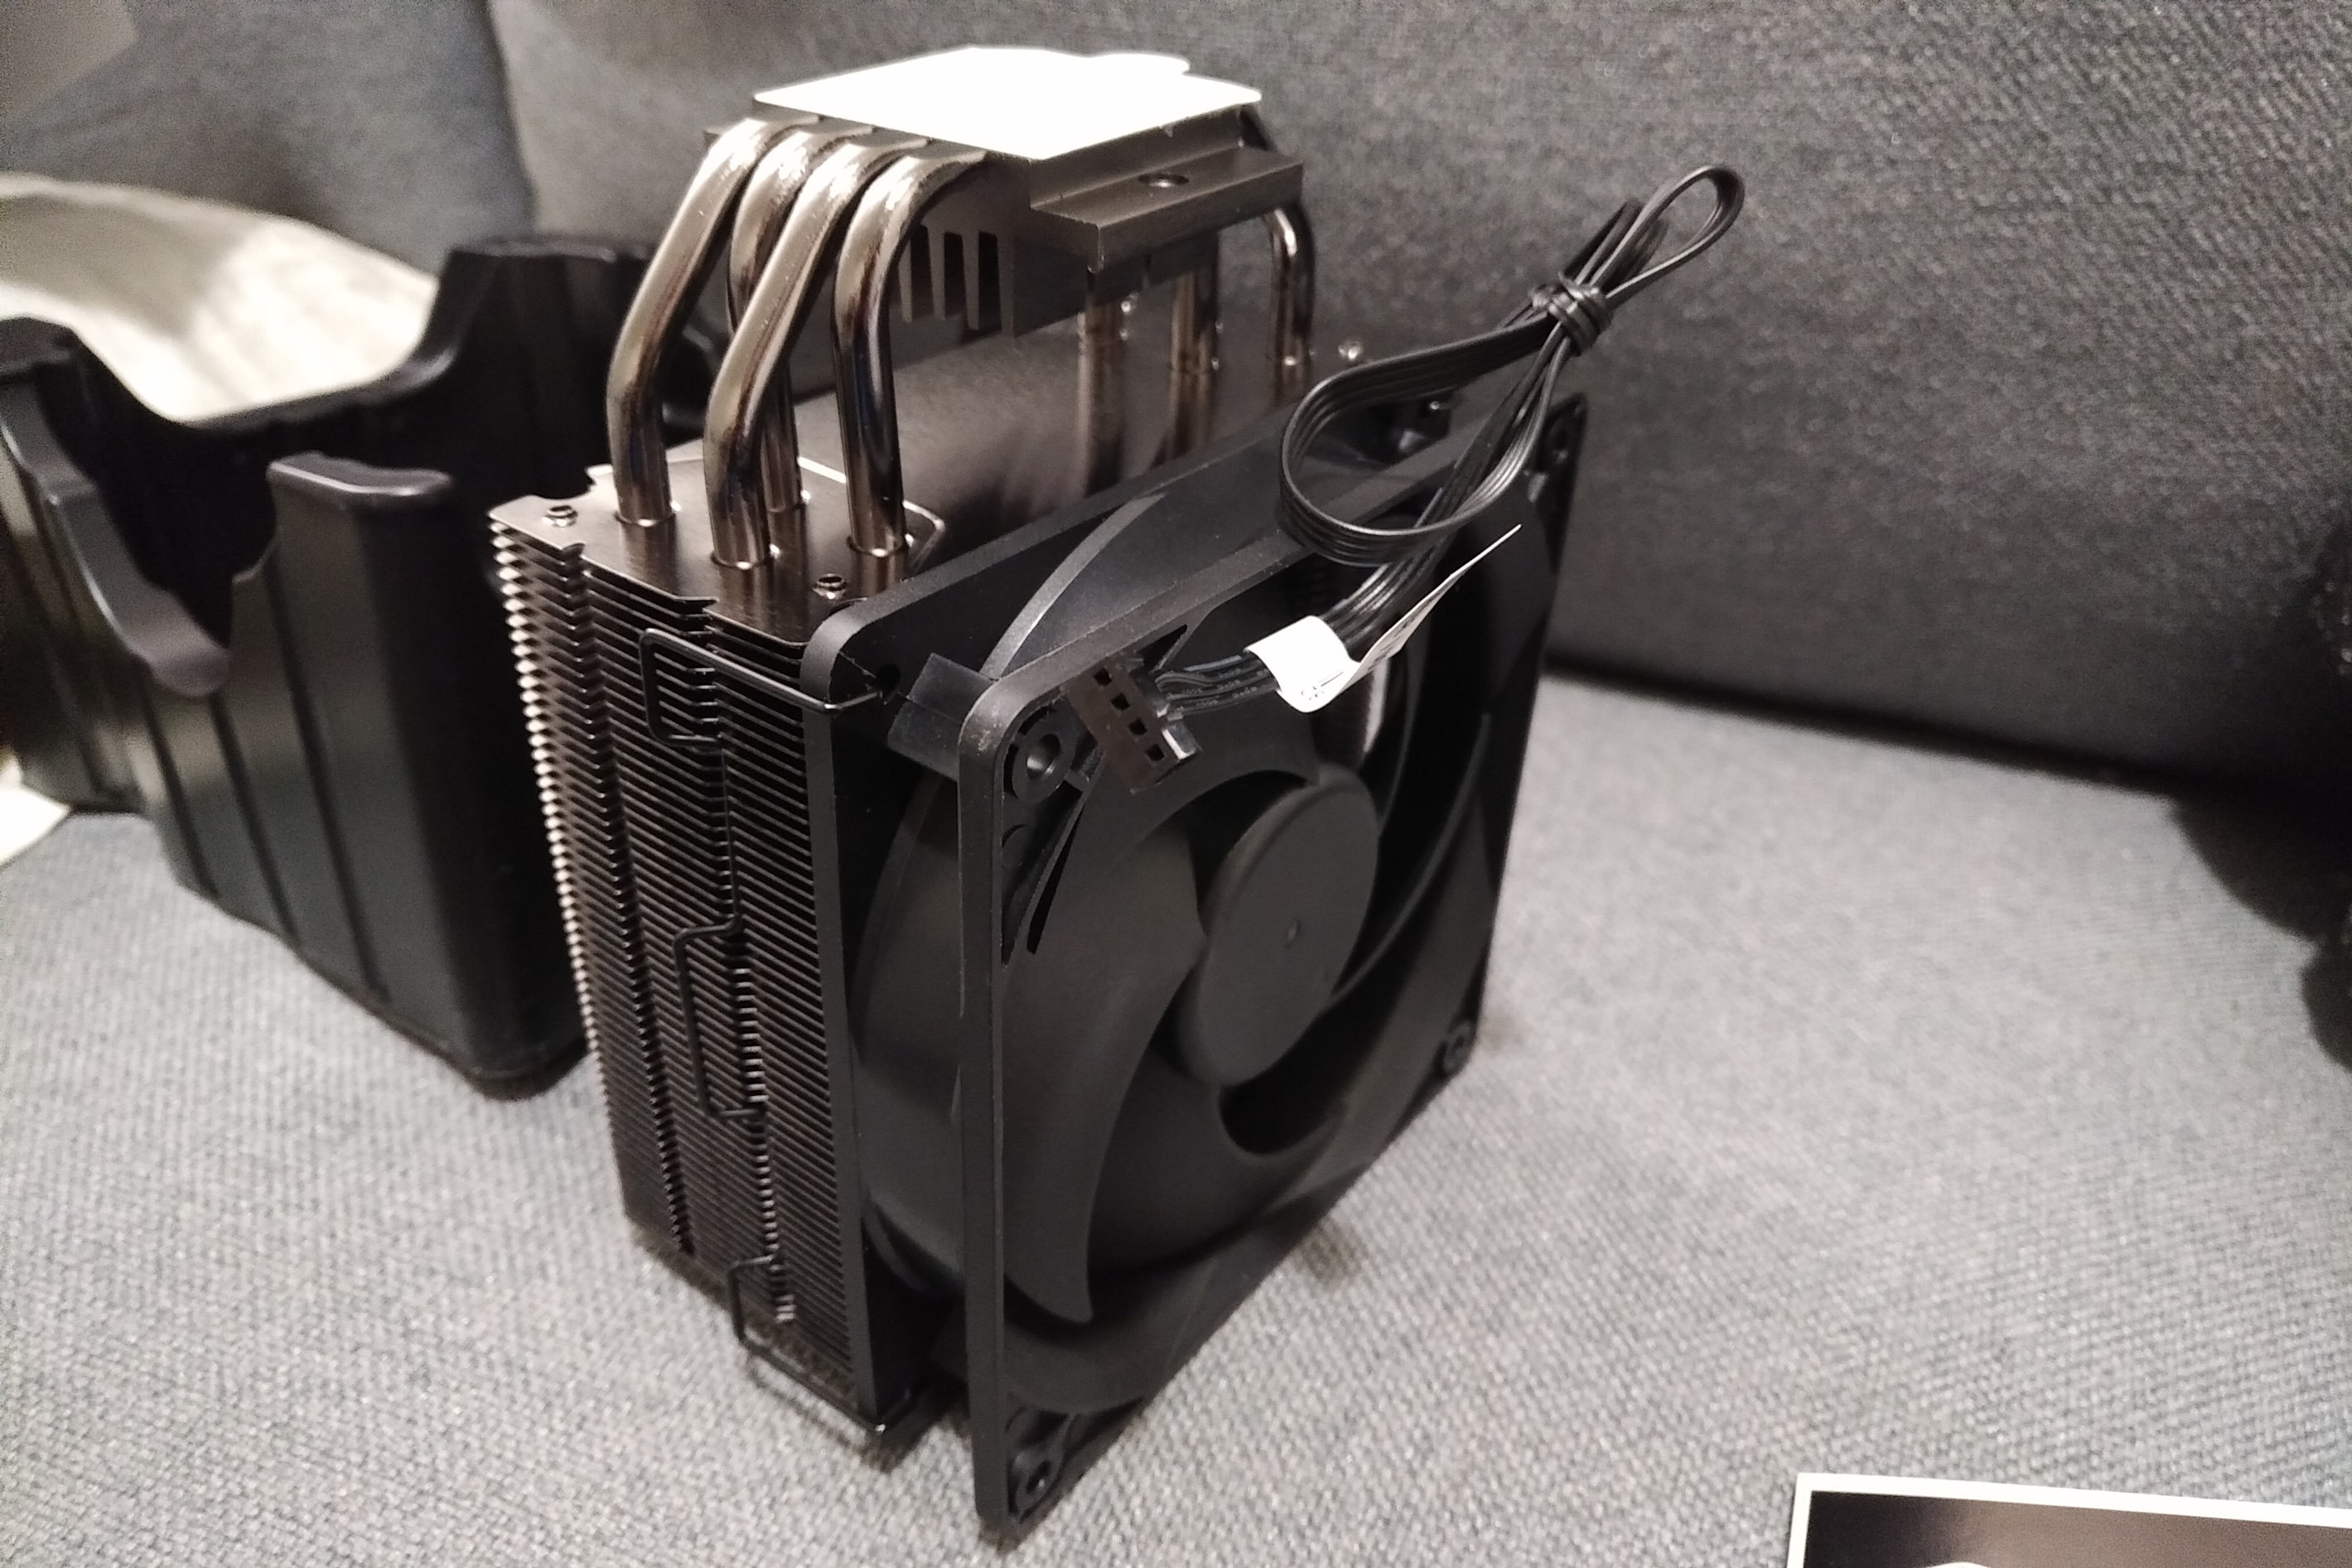 Cooler with heat pipes